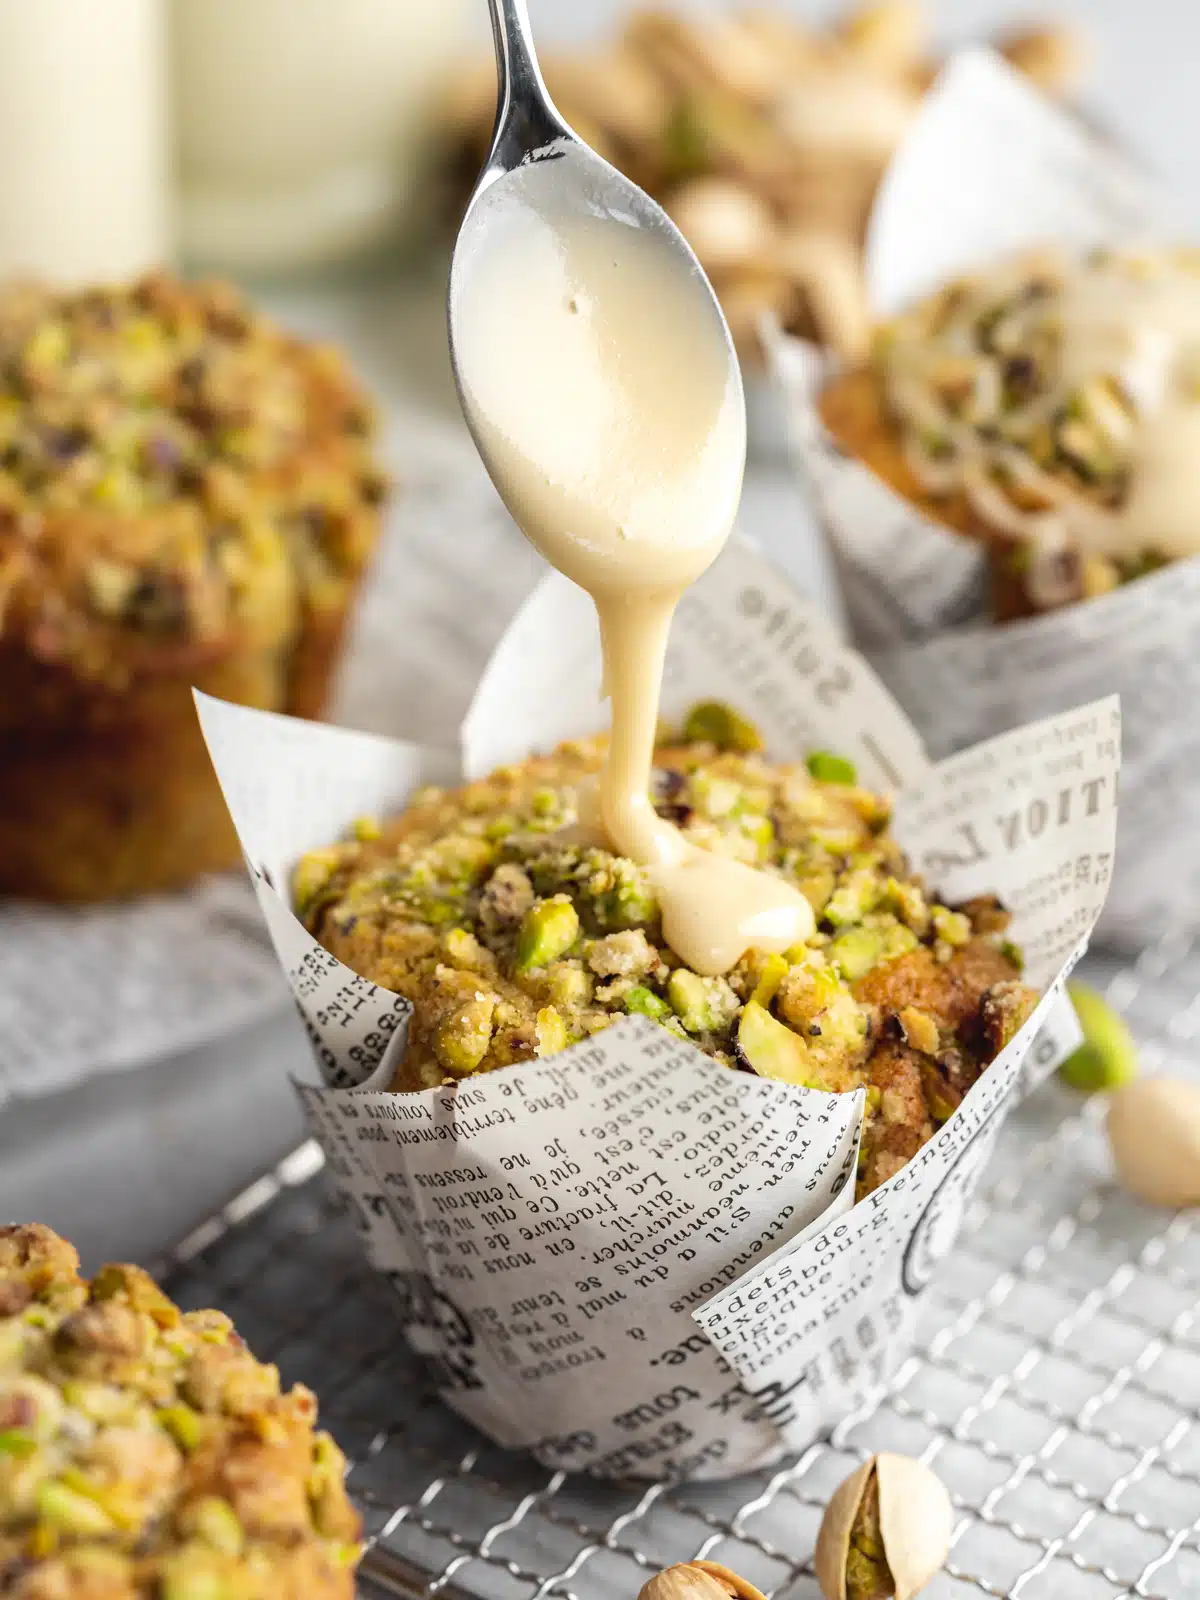 pistachio muffins with streusel topping in tulip muffin liners with a spoon drizzling vanilla sugar glaze on top.